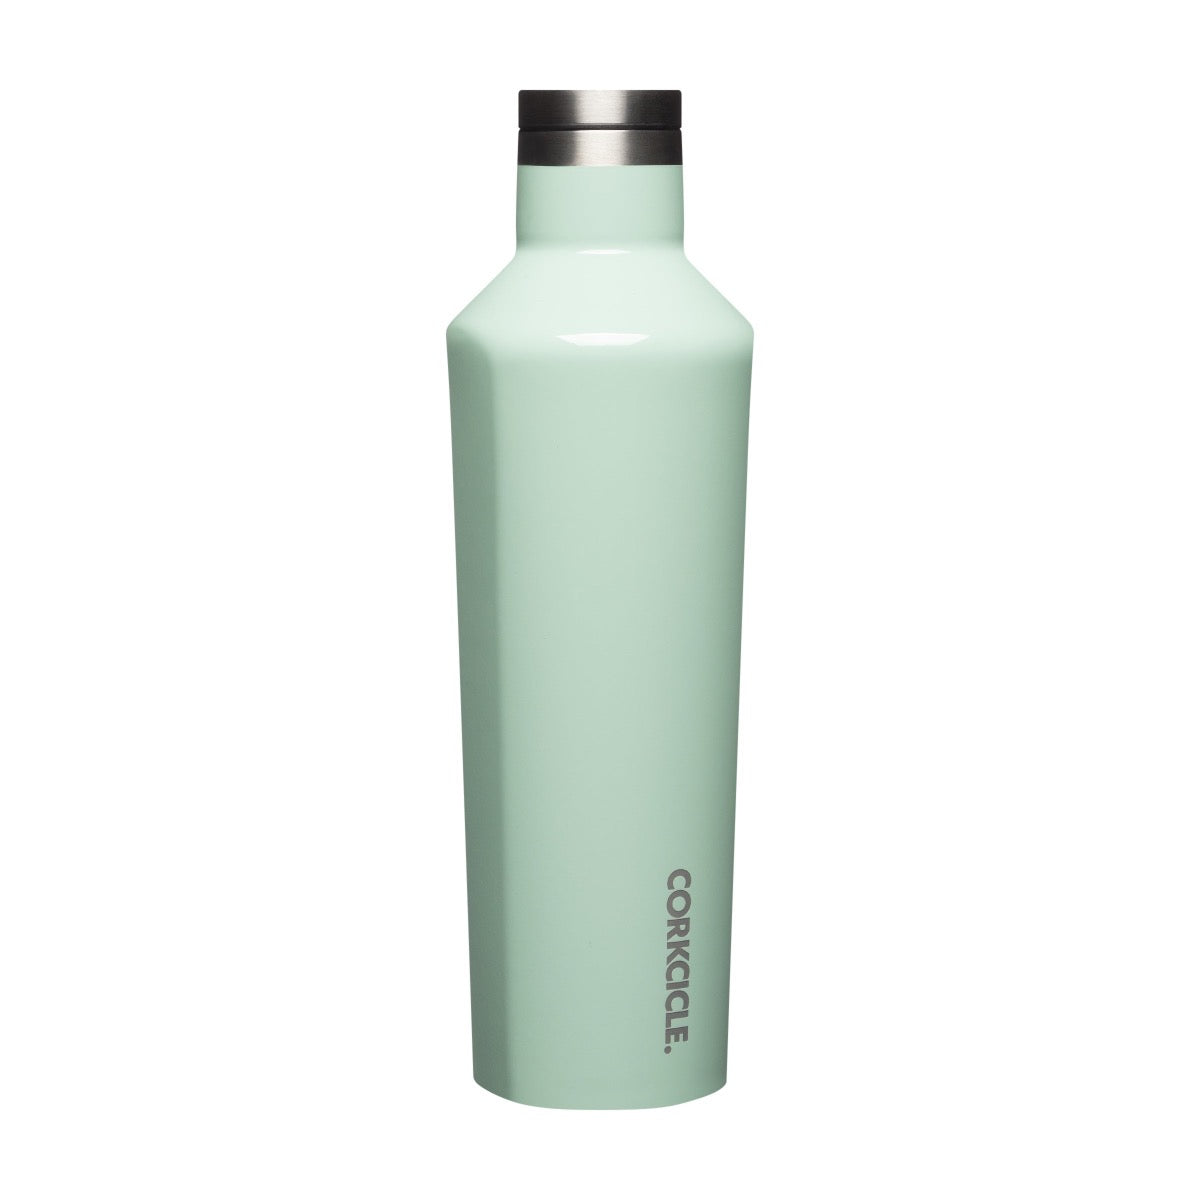 Corkcicle Classic Canteen 475ml - Matcha - Insulated Stainless Steel Bottle